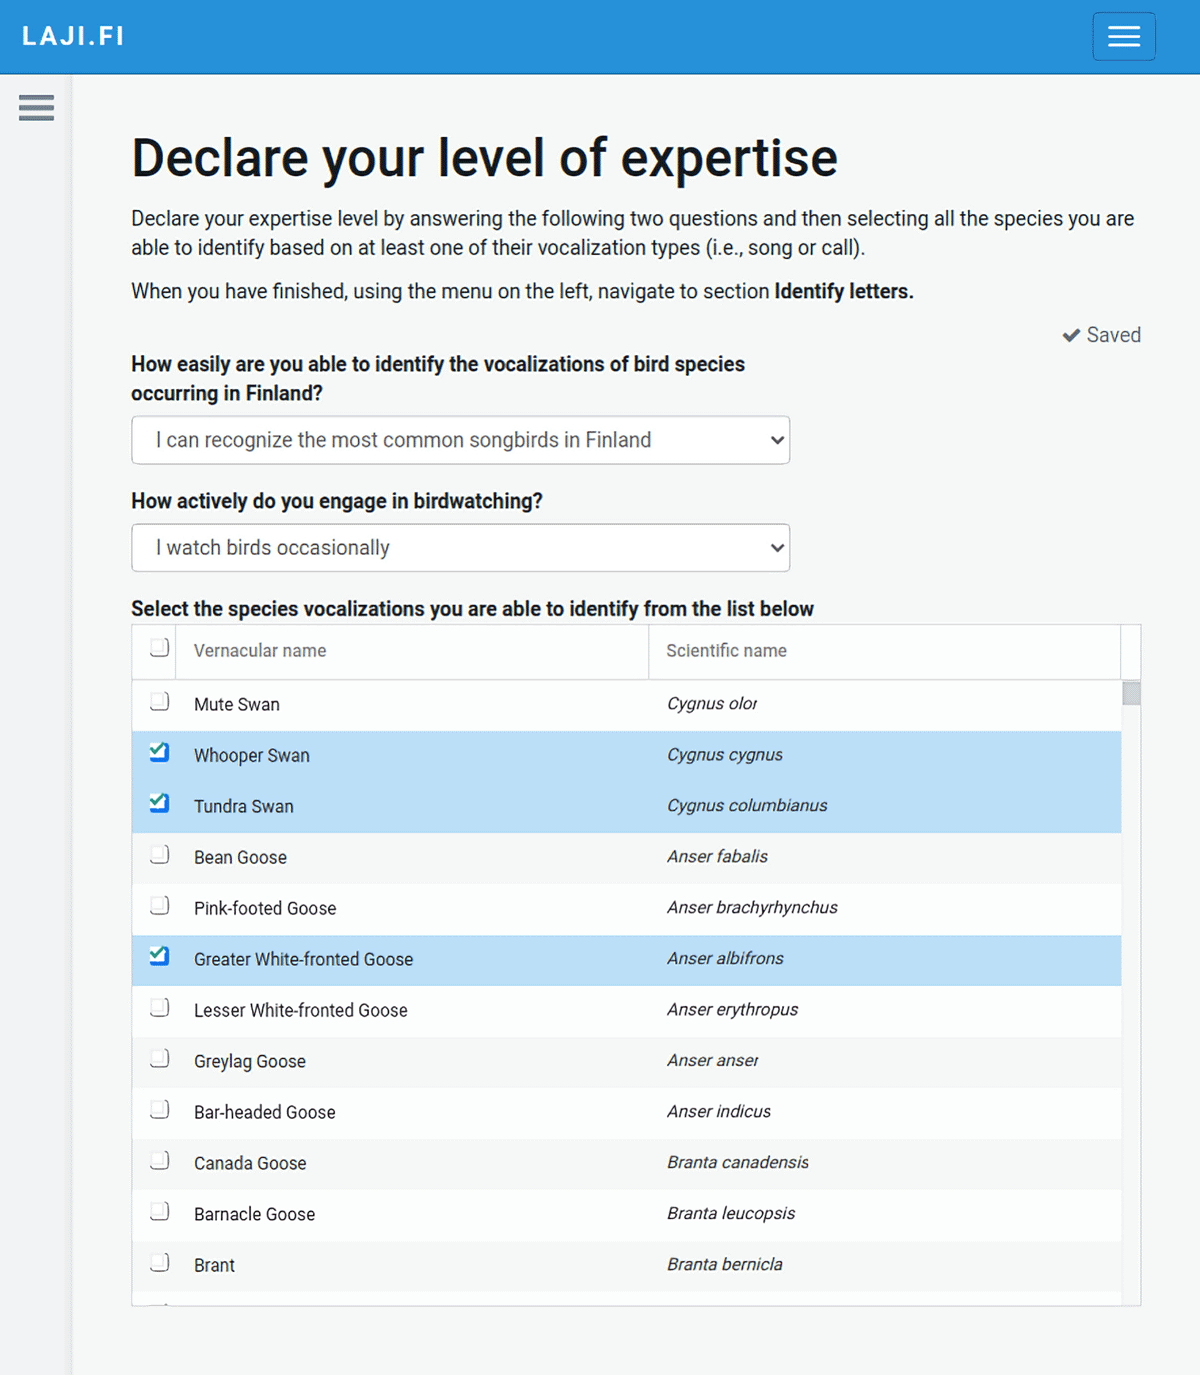 Webportal view of section “Declare your level of expertise.”